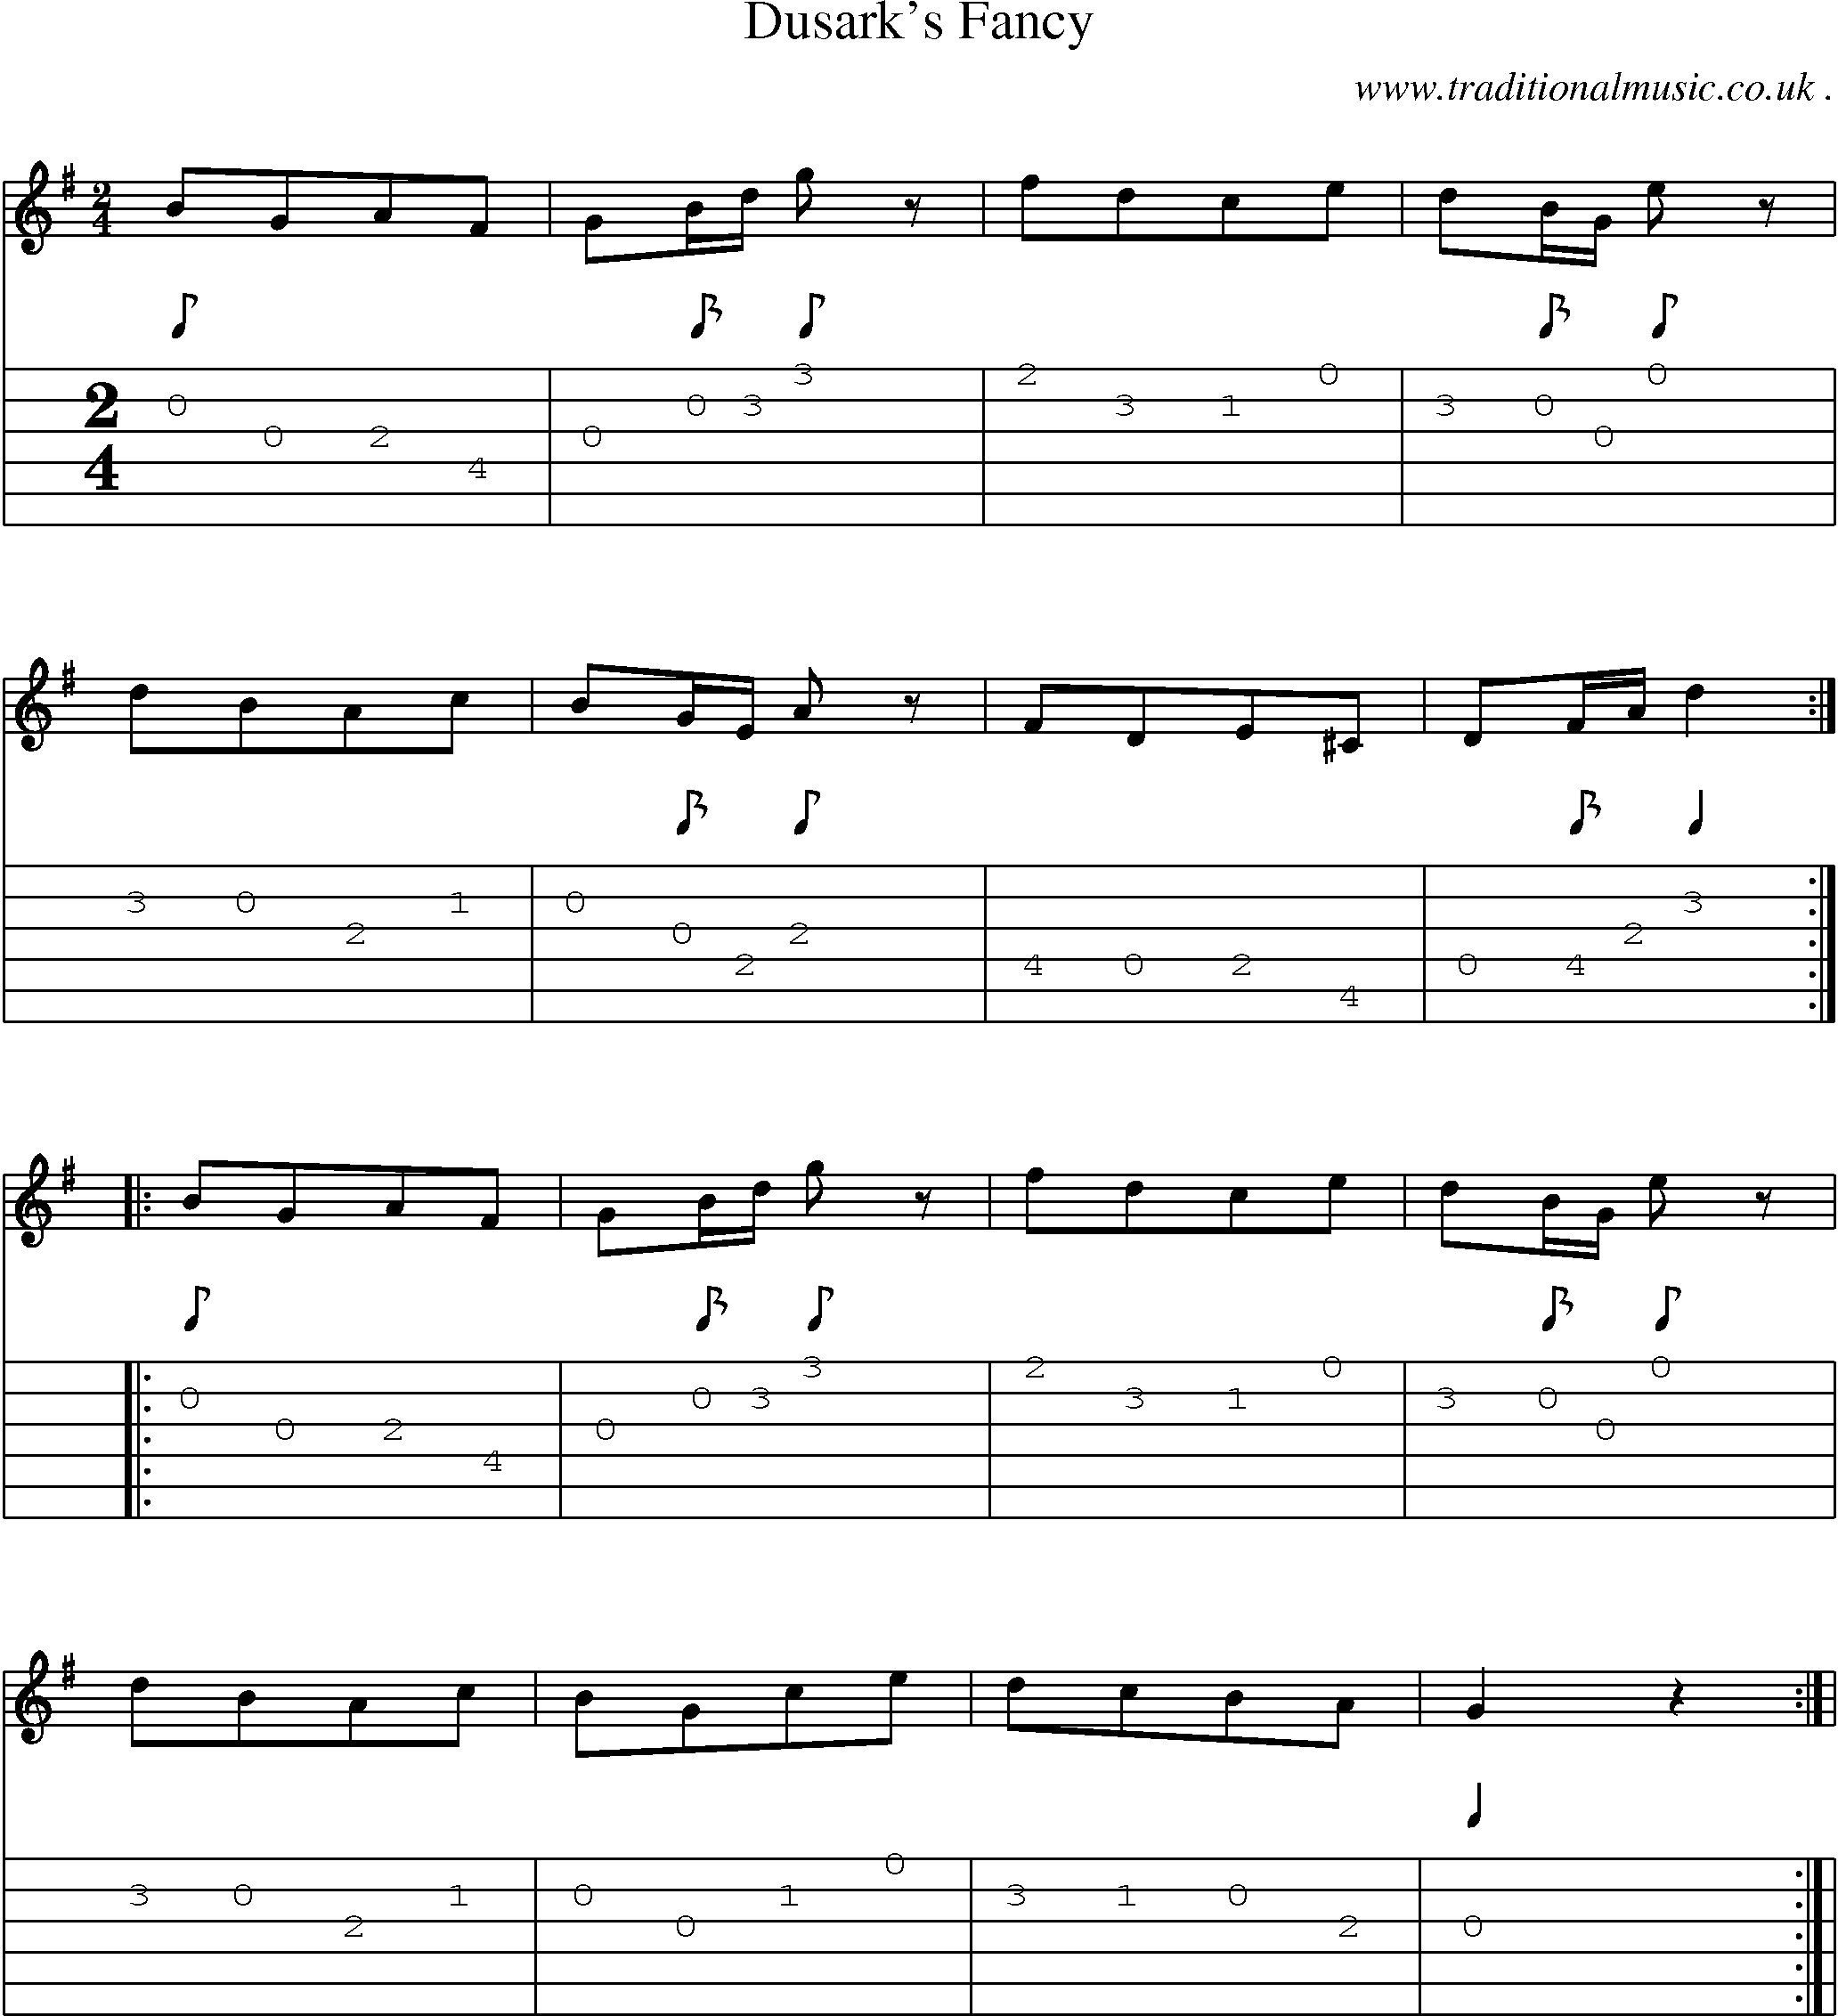 Sheet-Music and Guitar Tabs for Dusarks Fancy